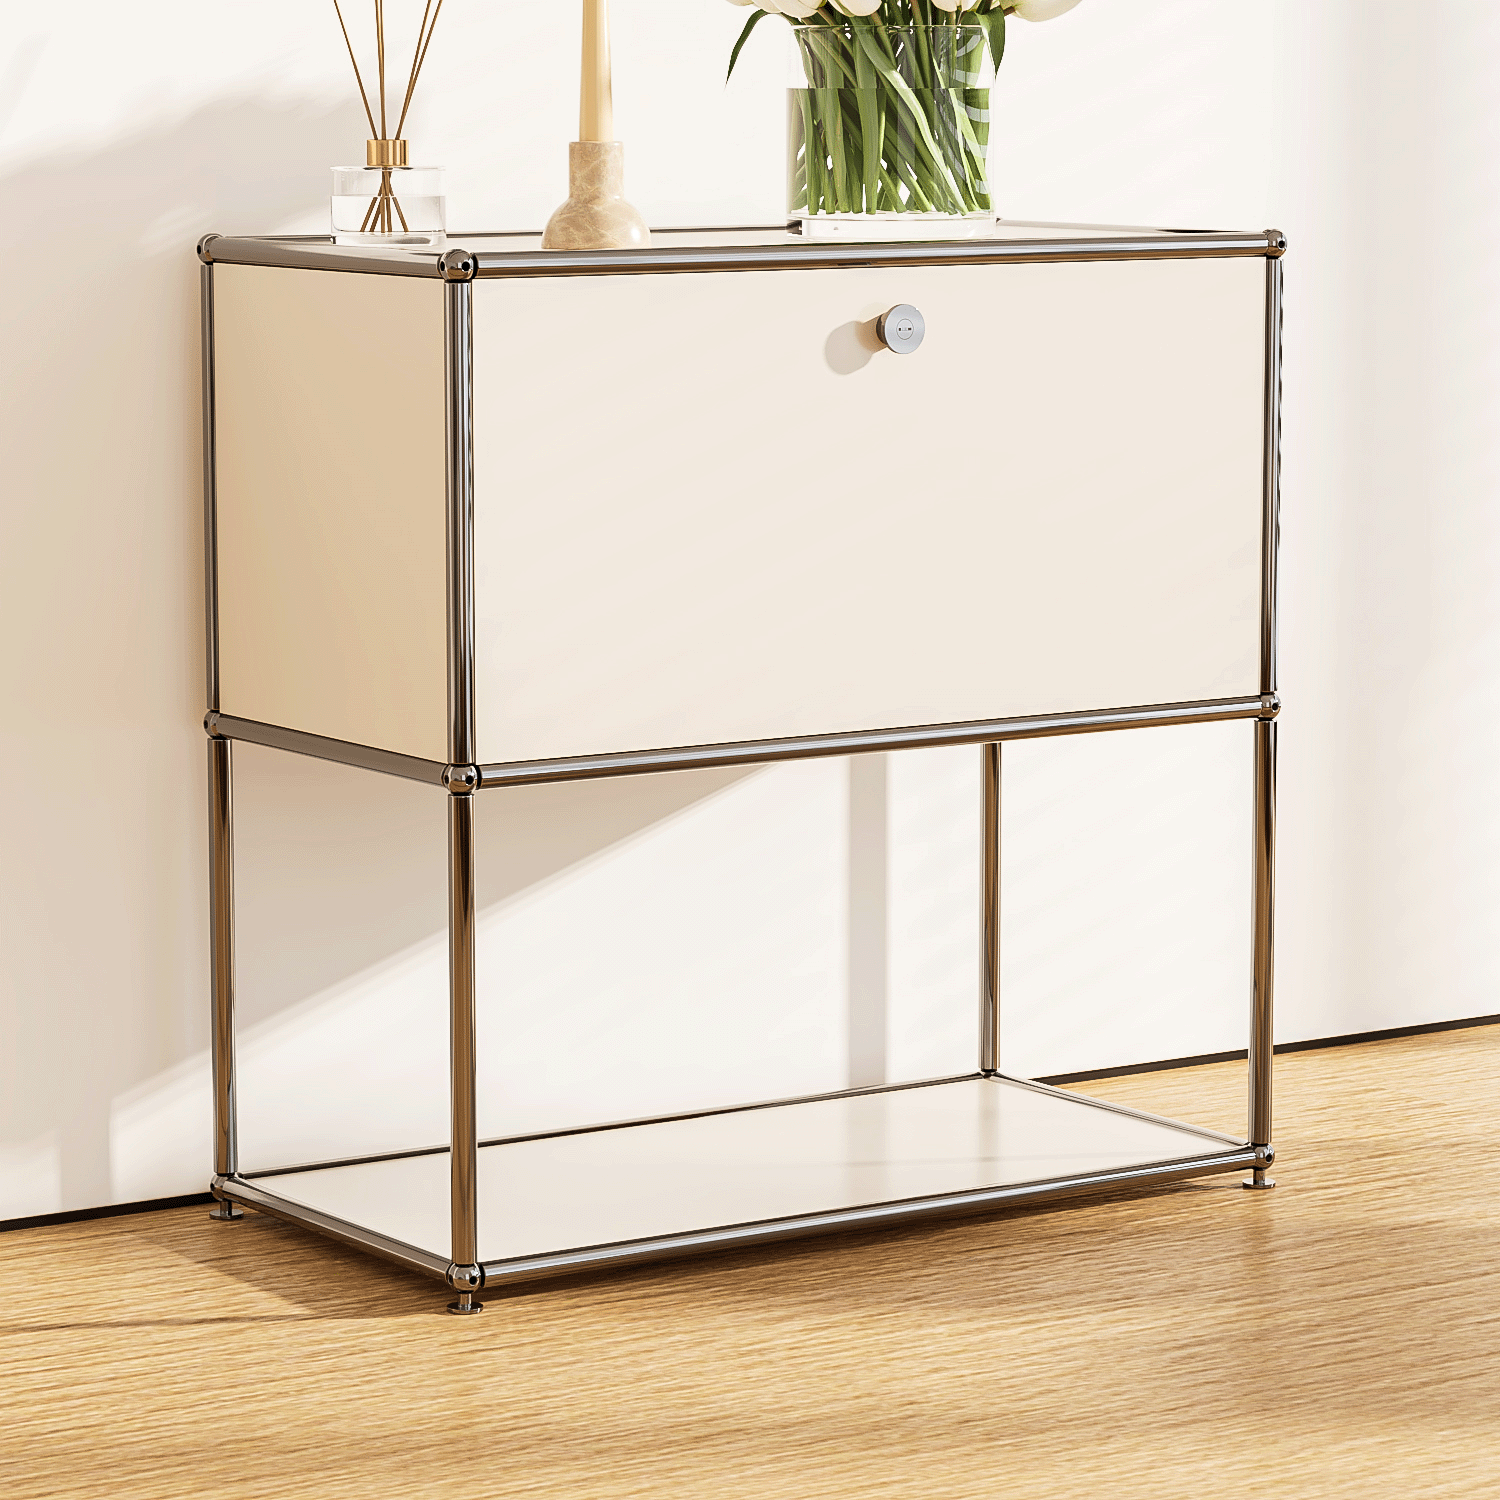 Luxuriance Designs - USM Haller P2 Bedside Table Nightstand Replica - Review